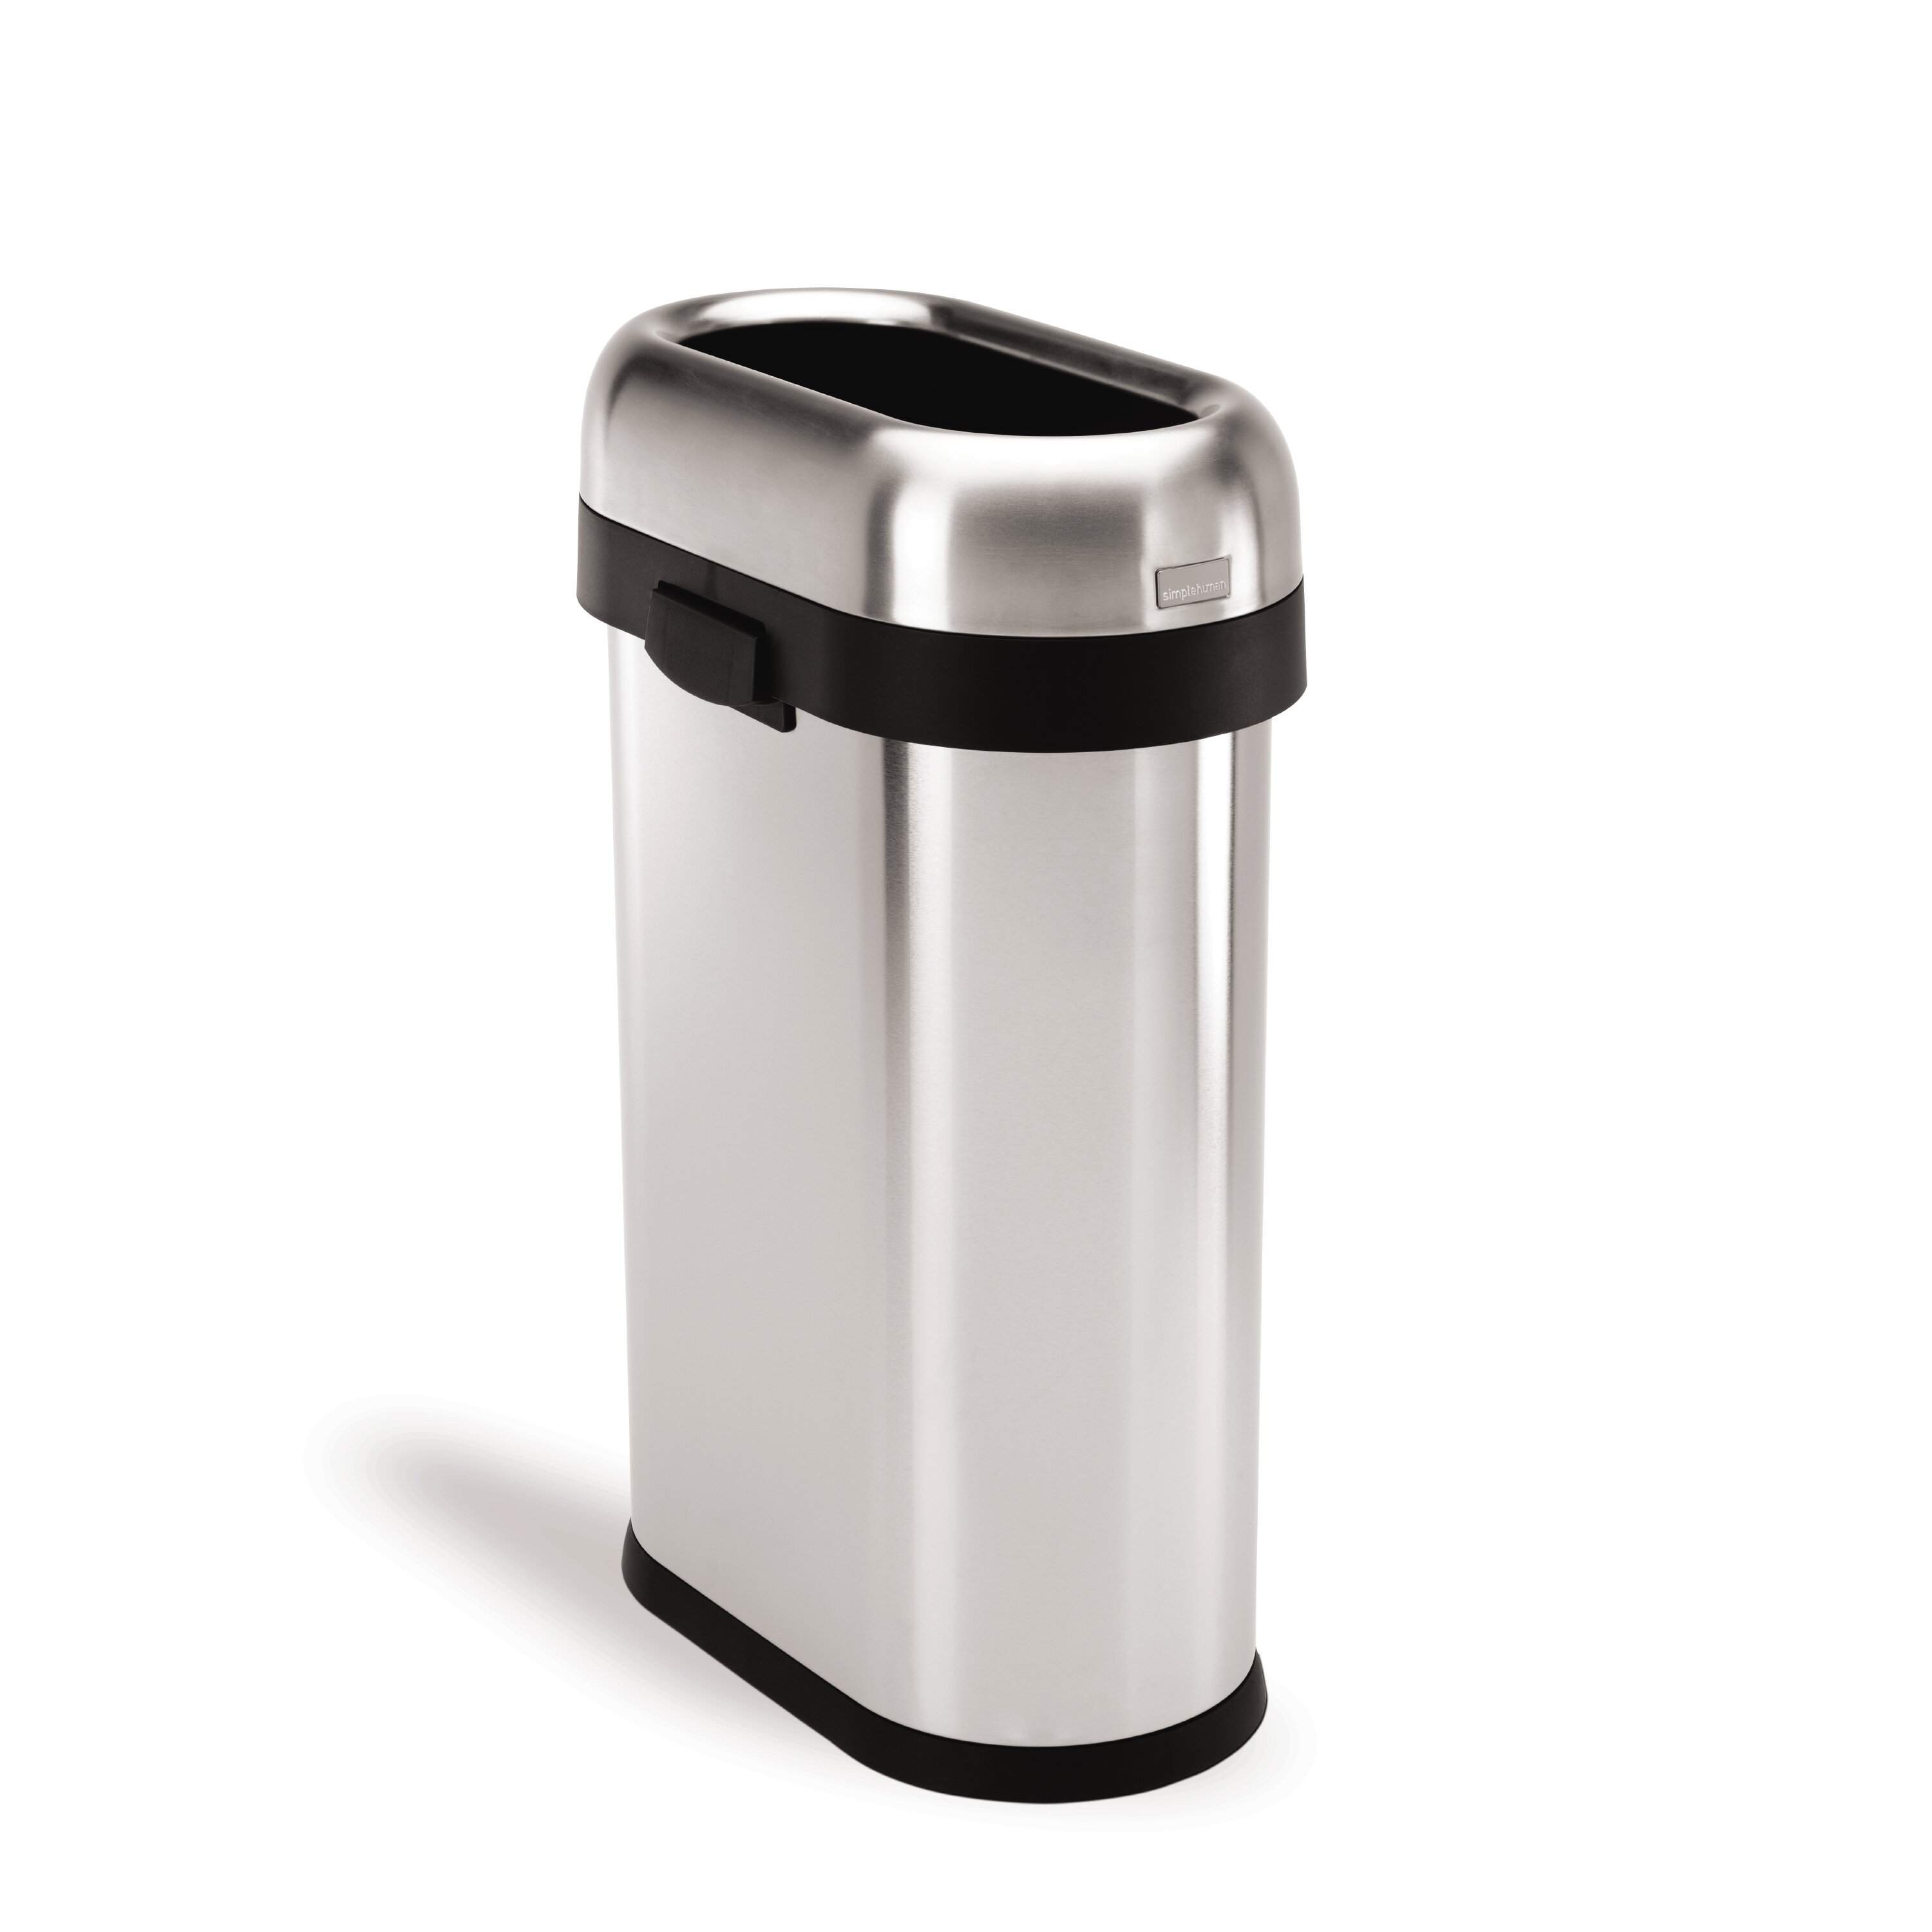 simplehuman 50 L / 13 Gal, Slim Open Trash Can, Commercial Grade 13 Gallon Slim Stainless Steel Trash Can